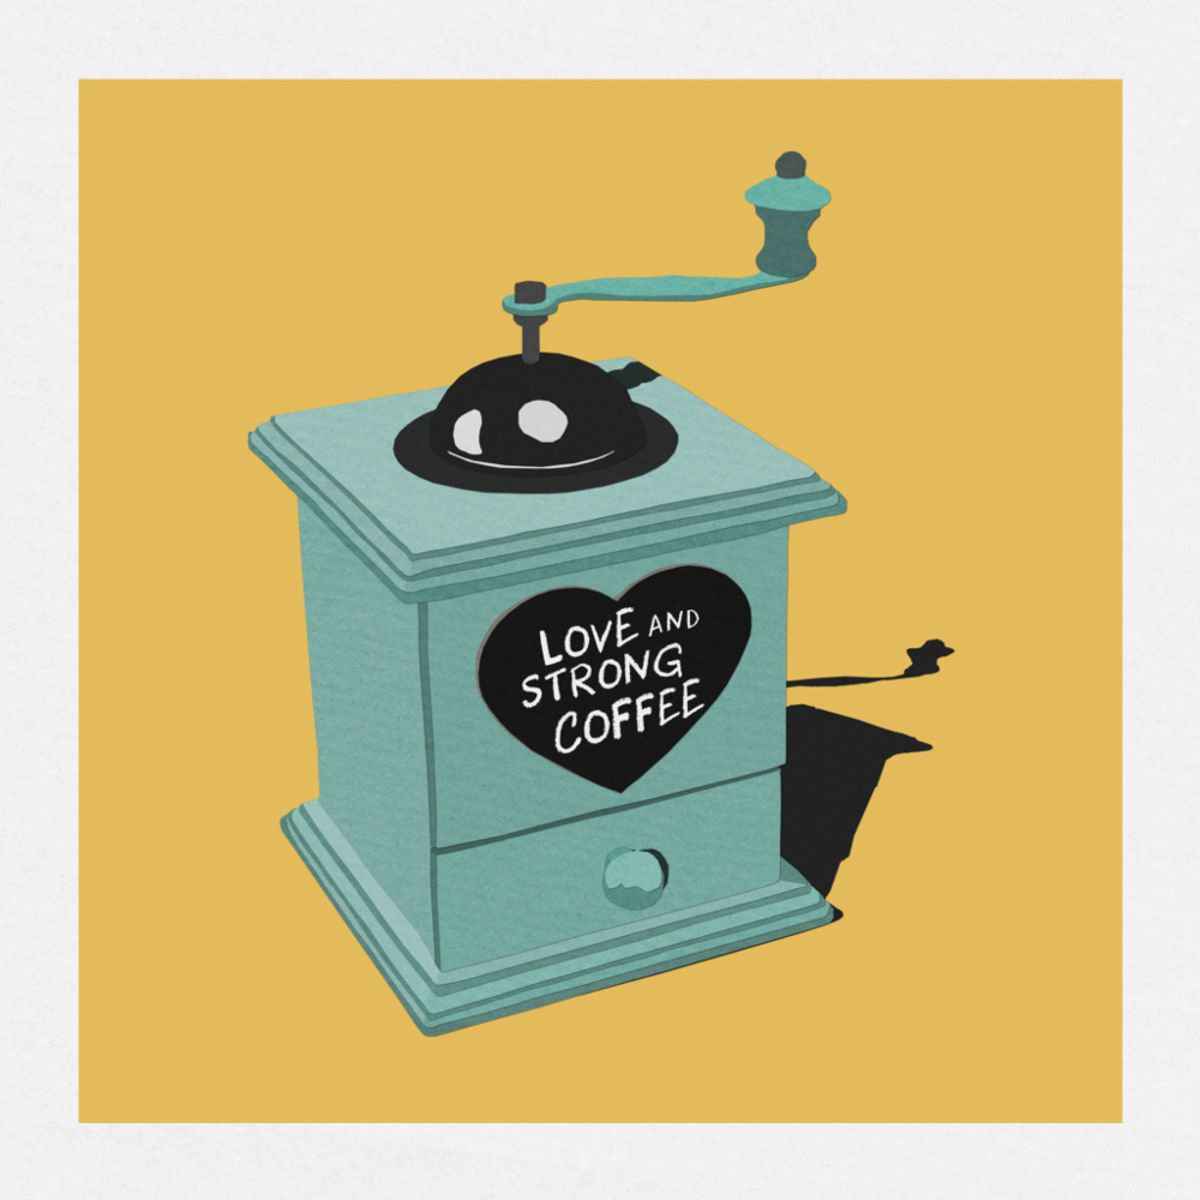 Love and Strong Coffee by Peter Walters